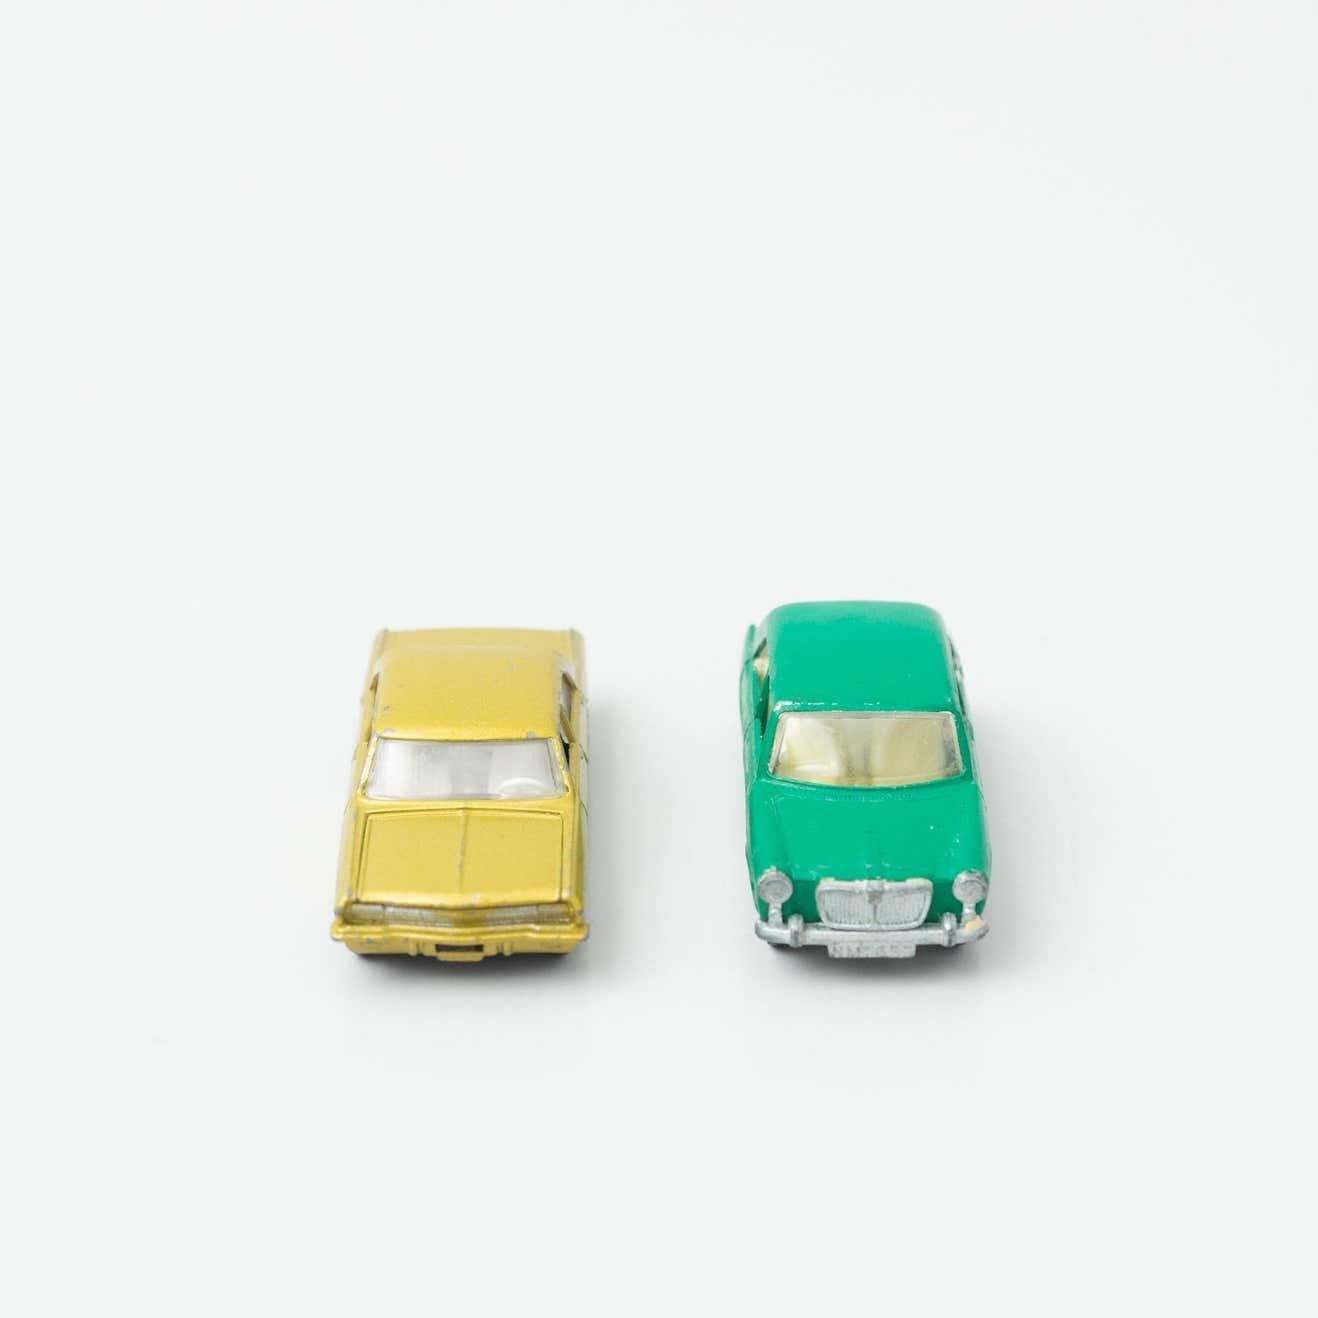 Set of two vintage Opel car toys.
By MatchBox, circa 1960.

In original condition, with minor wear consistent with age and use, preserving a beautiful patina.

Materials:
Metal
Plastic

Dimensions (each one):
D 7.1 cm x W 3.5 cm x H 3 cm.